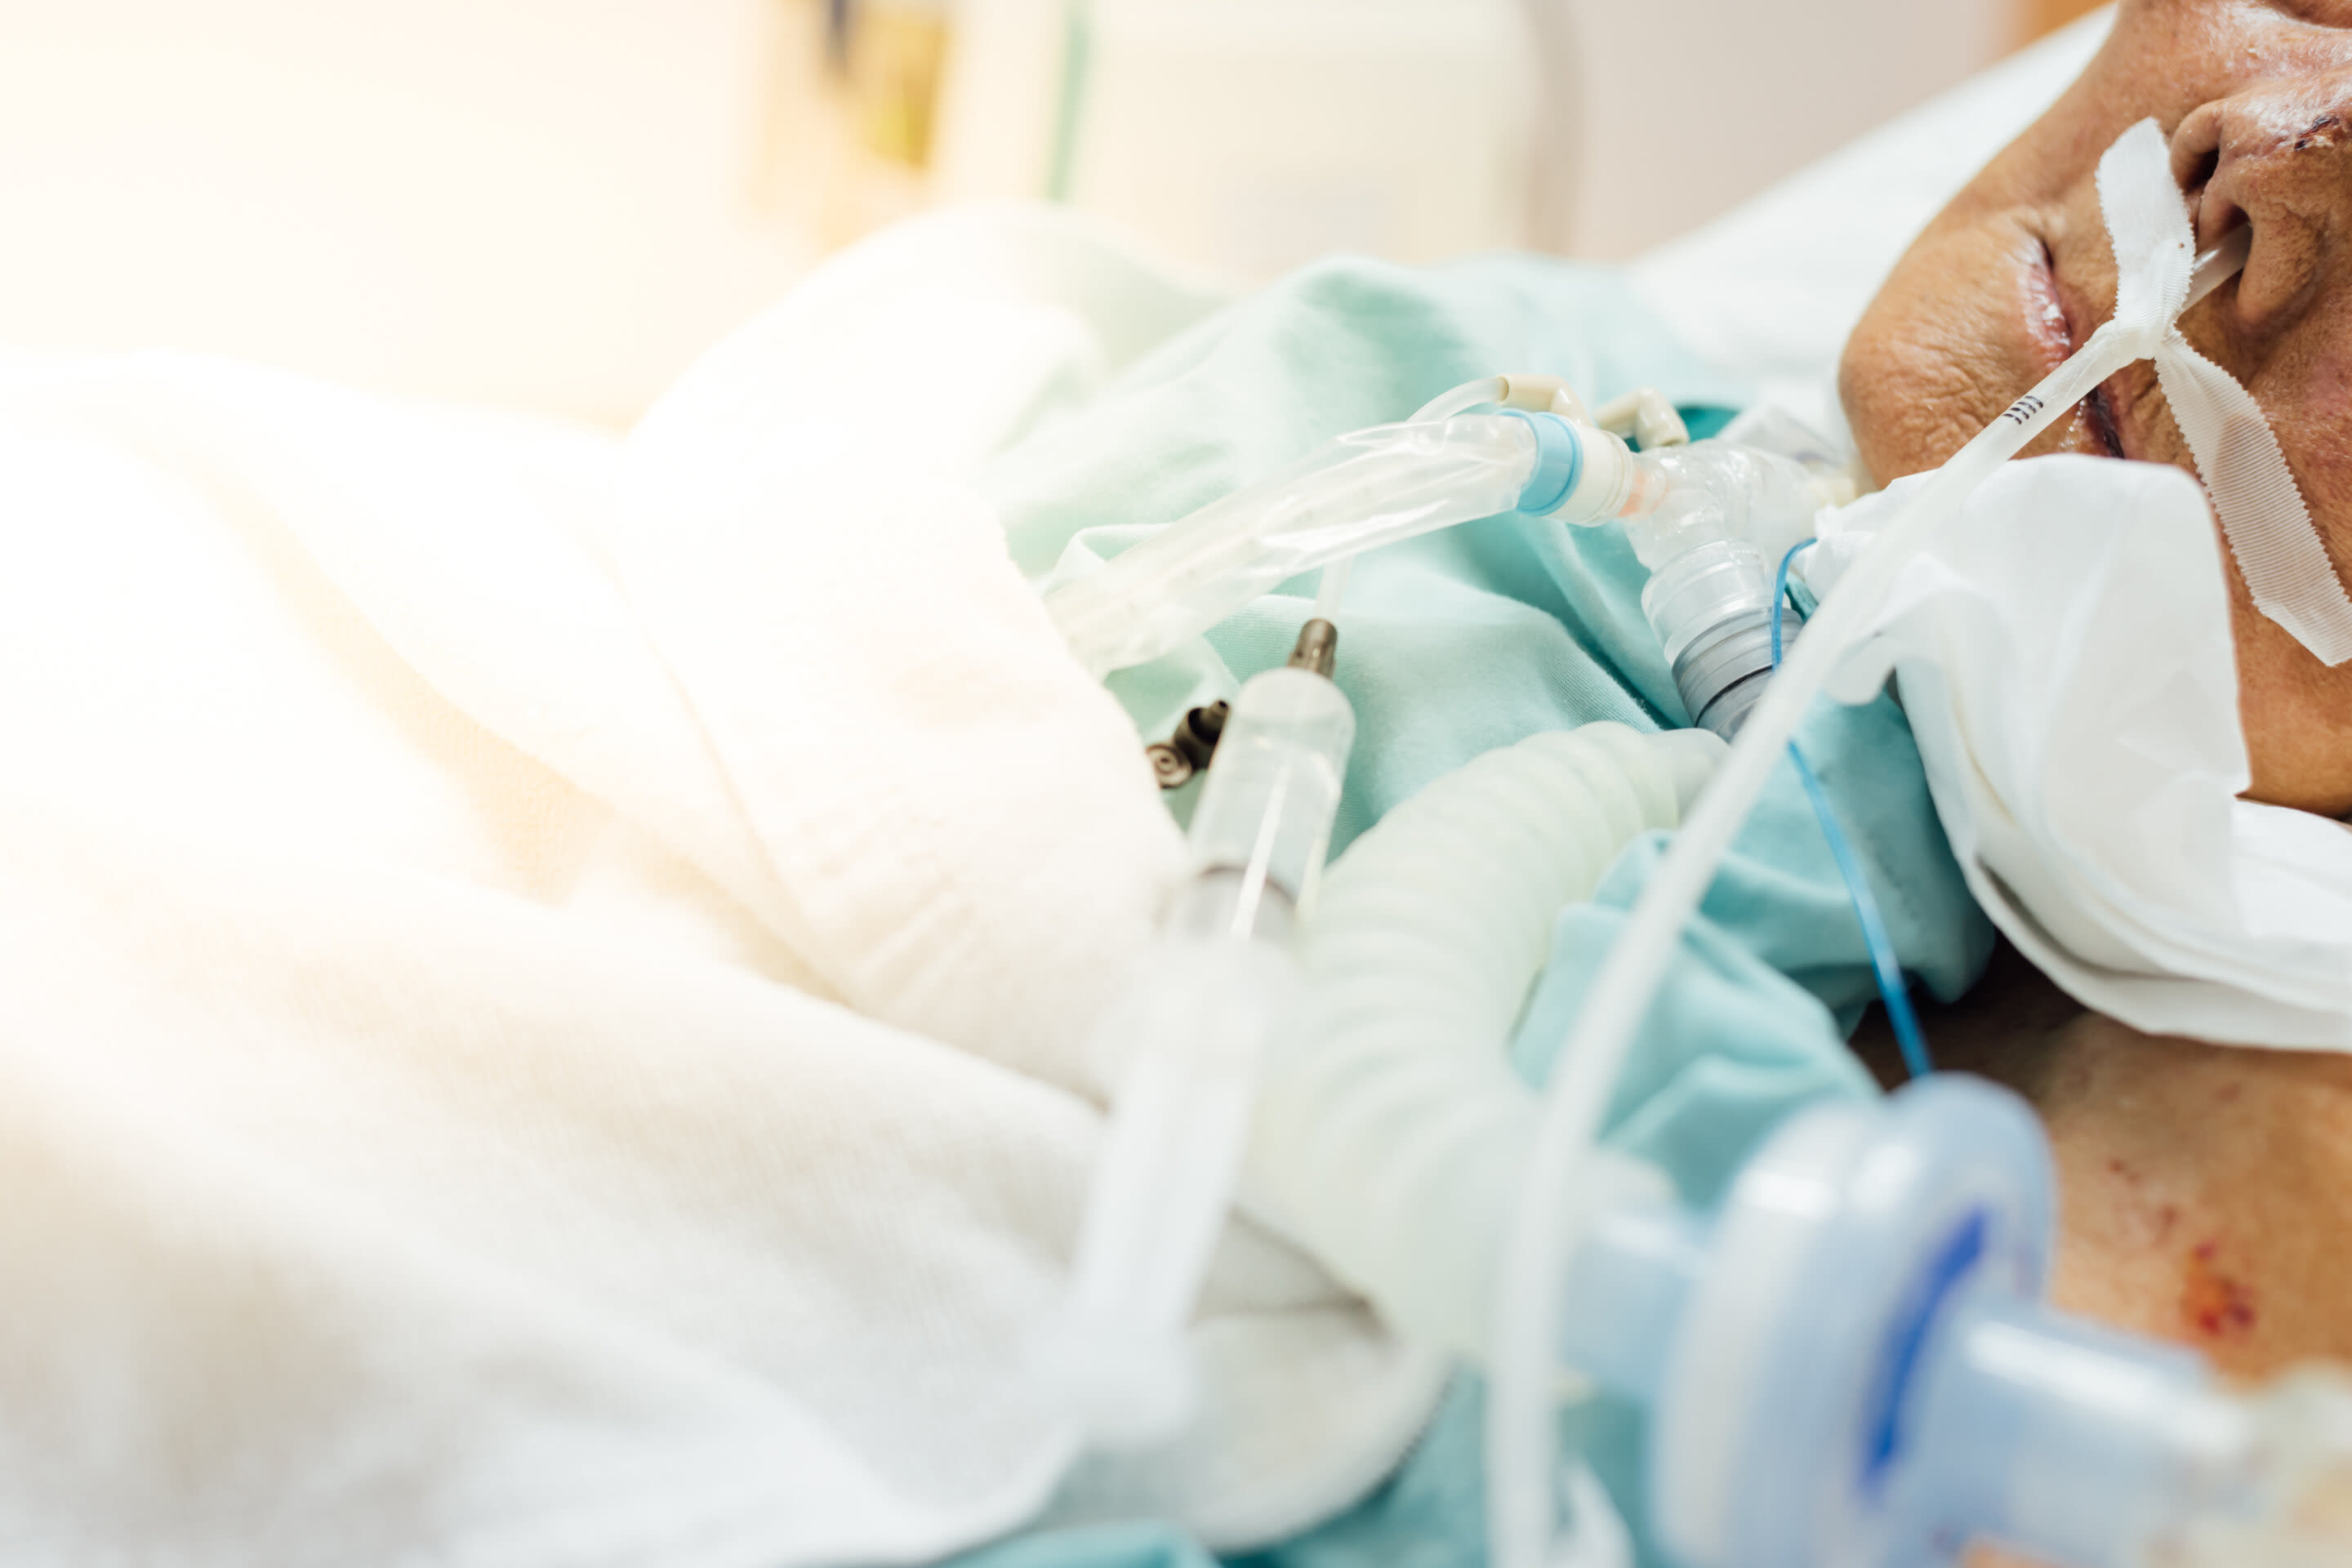 Hospitals caring for diverse patient populations found to have higher mechanical ventilation mortality